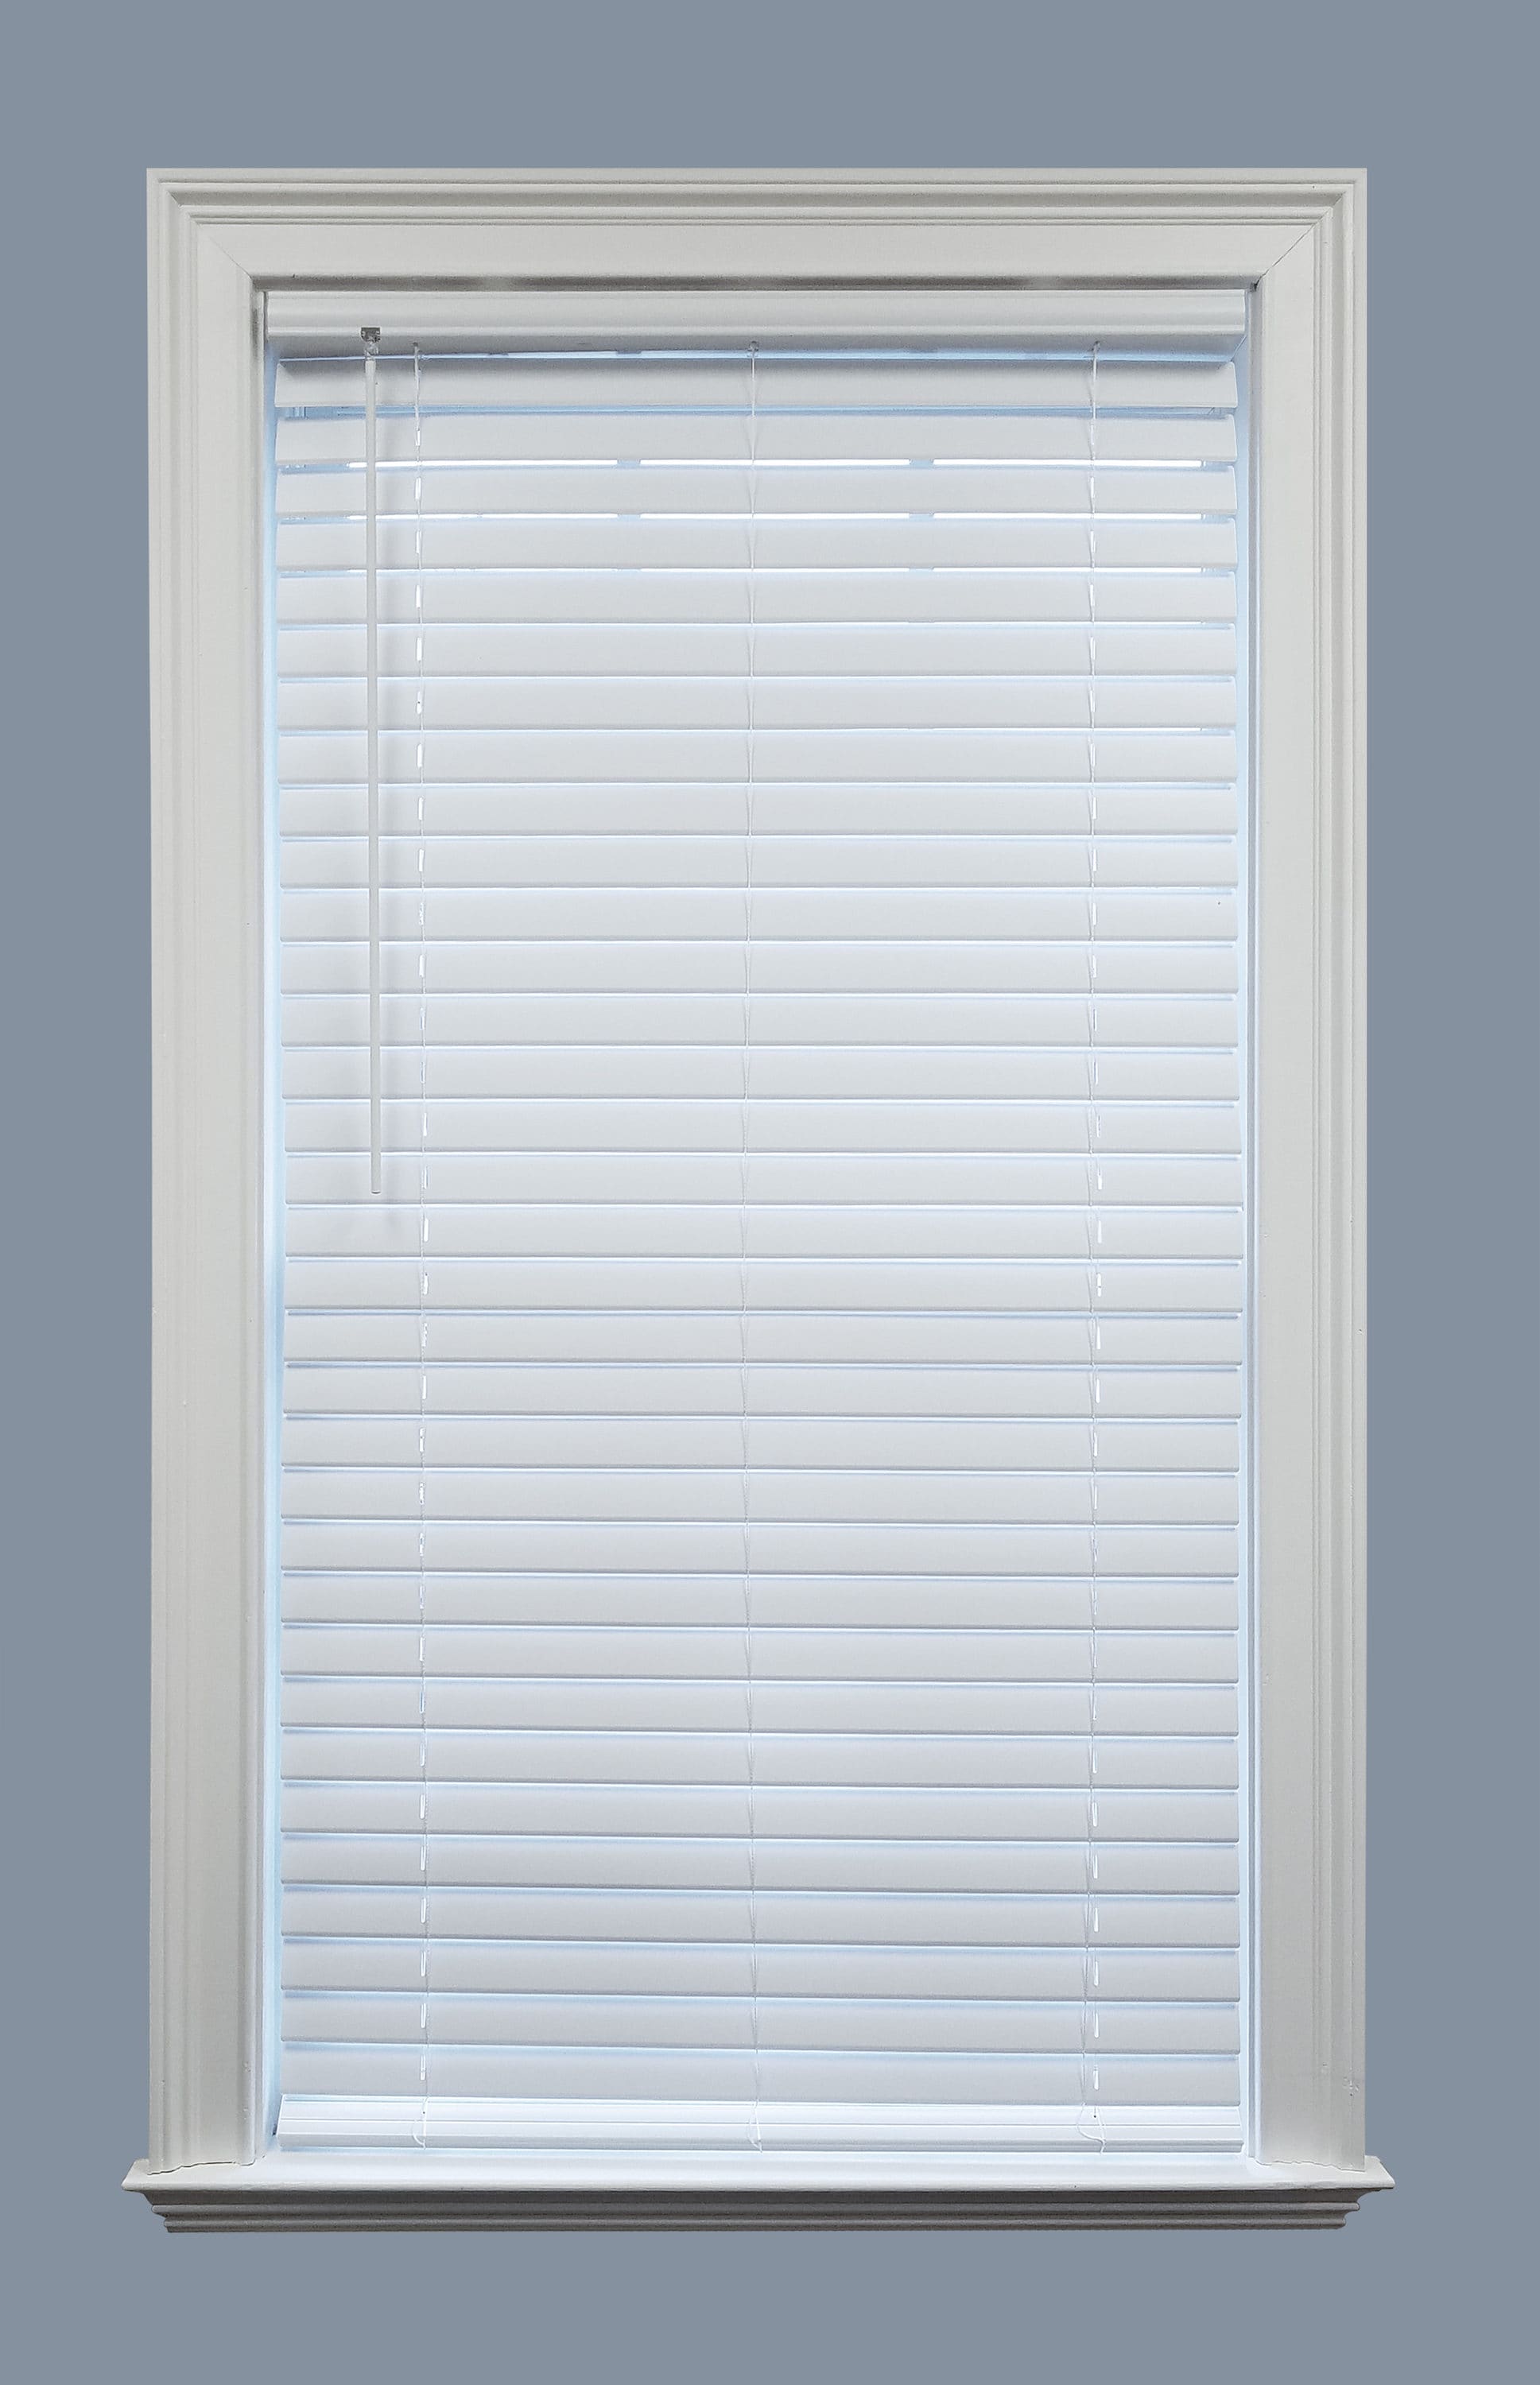 premium-2-in-blinds-window-shades-at-lowes